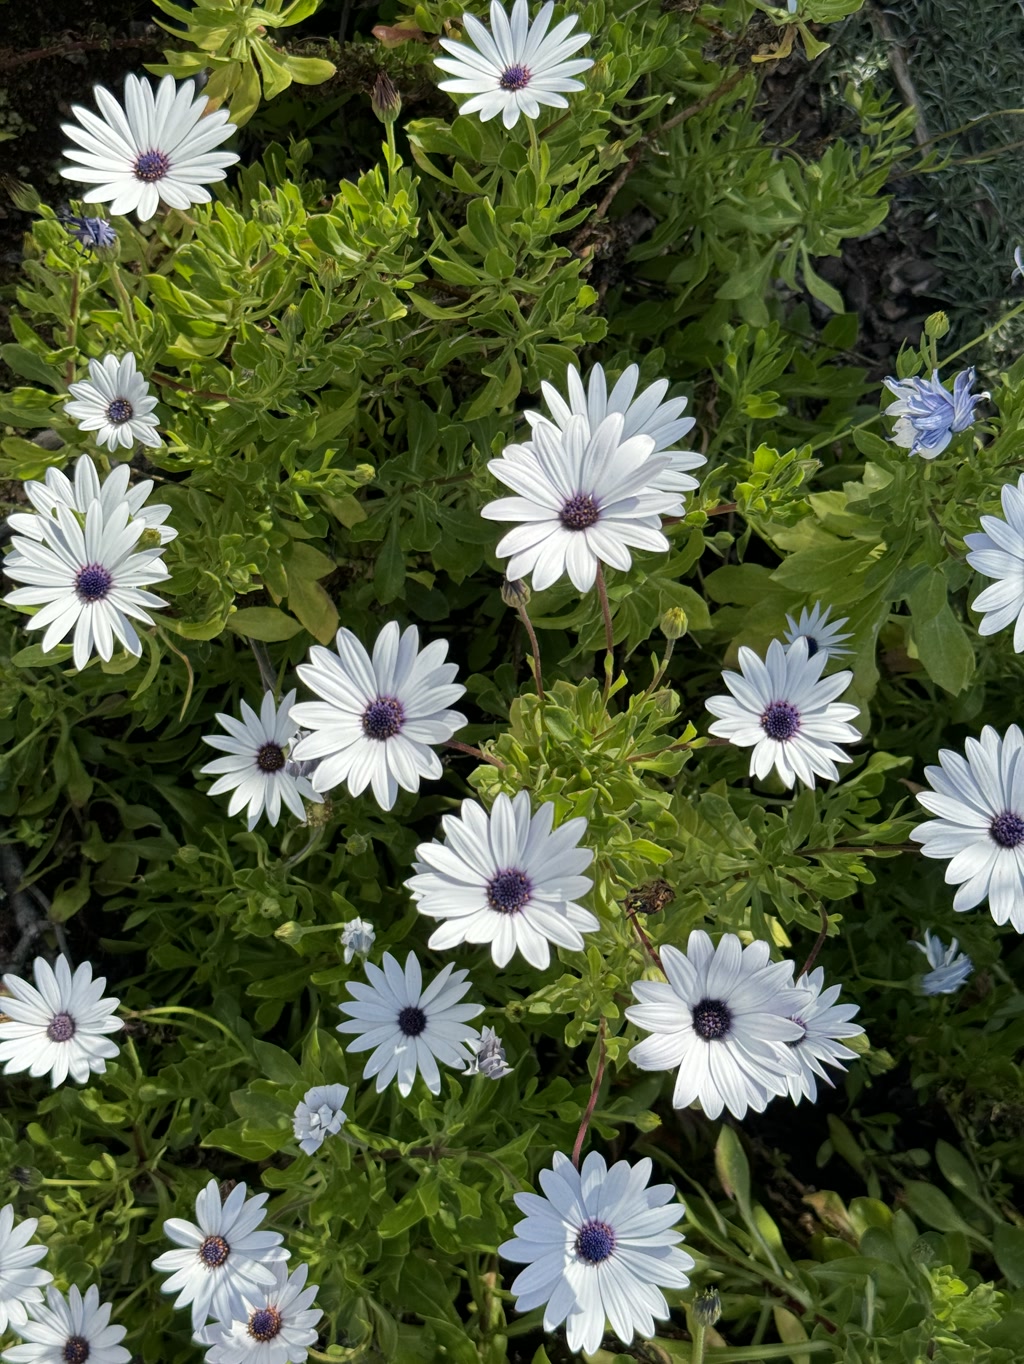 A close-up view of a cluster of flowers predominantly showcasing large white petals with dark purple to black centers. Scattered among these are a few delicate, light purple flowers with similar dark centers. The white flowers have a striking radial symmetry and are nestled in a bed of bright green leaves. The sunlight highlights the green leaves and white petals, emphasizing the vivid contrast between the flowers and the foliage.